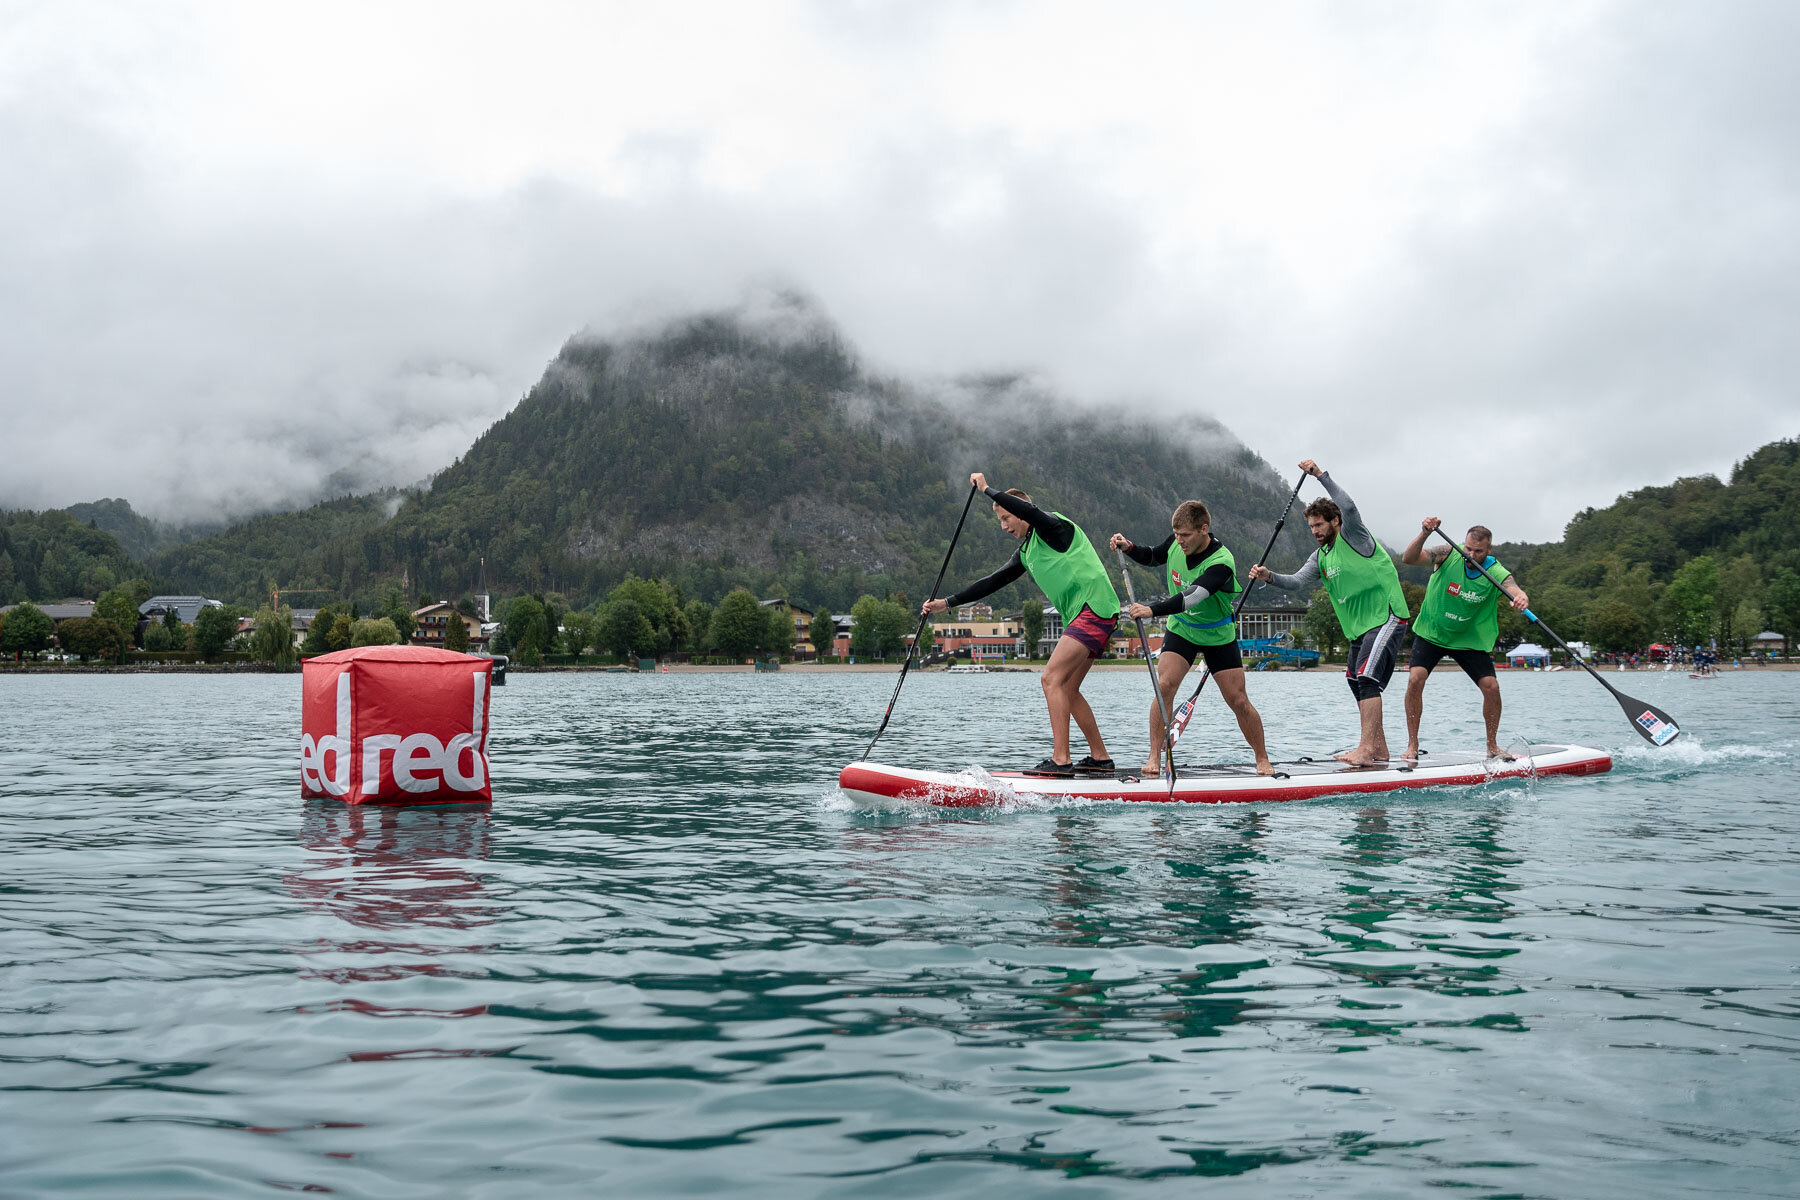  Red Paddle Co Dragon World Championships in Fuschk am See Austria 2018 